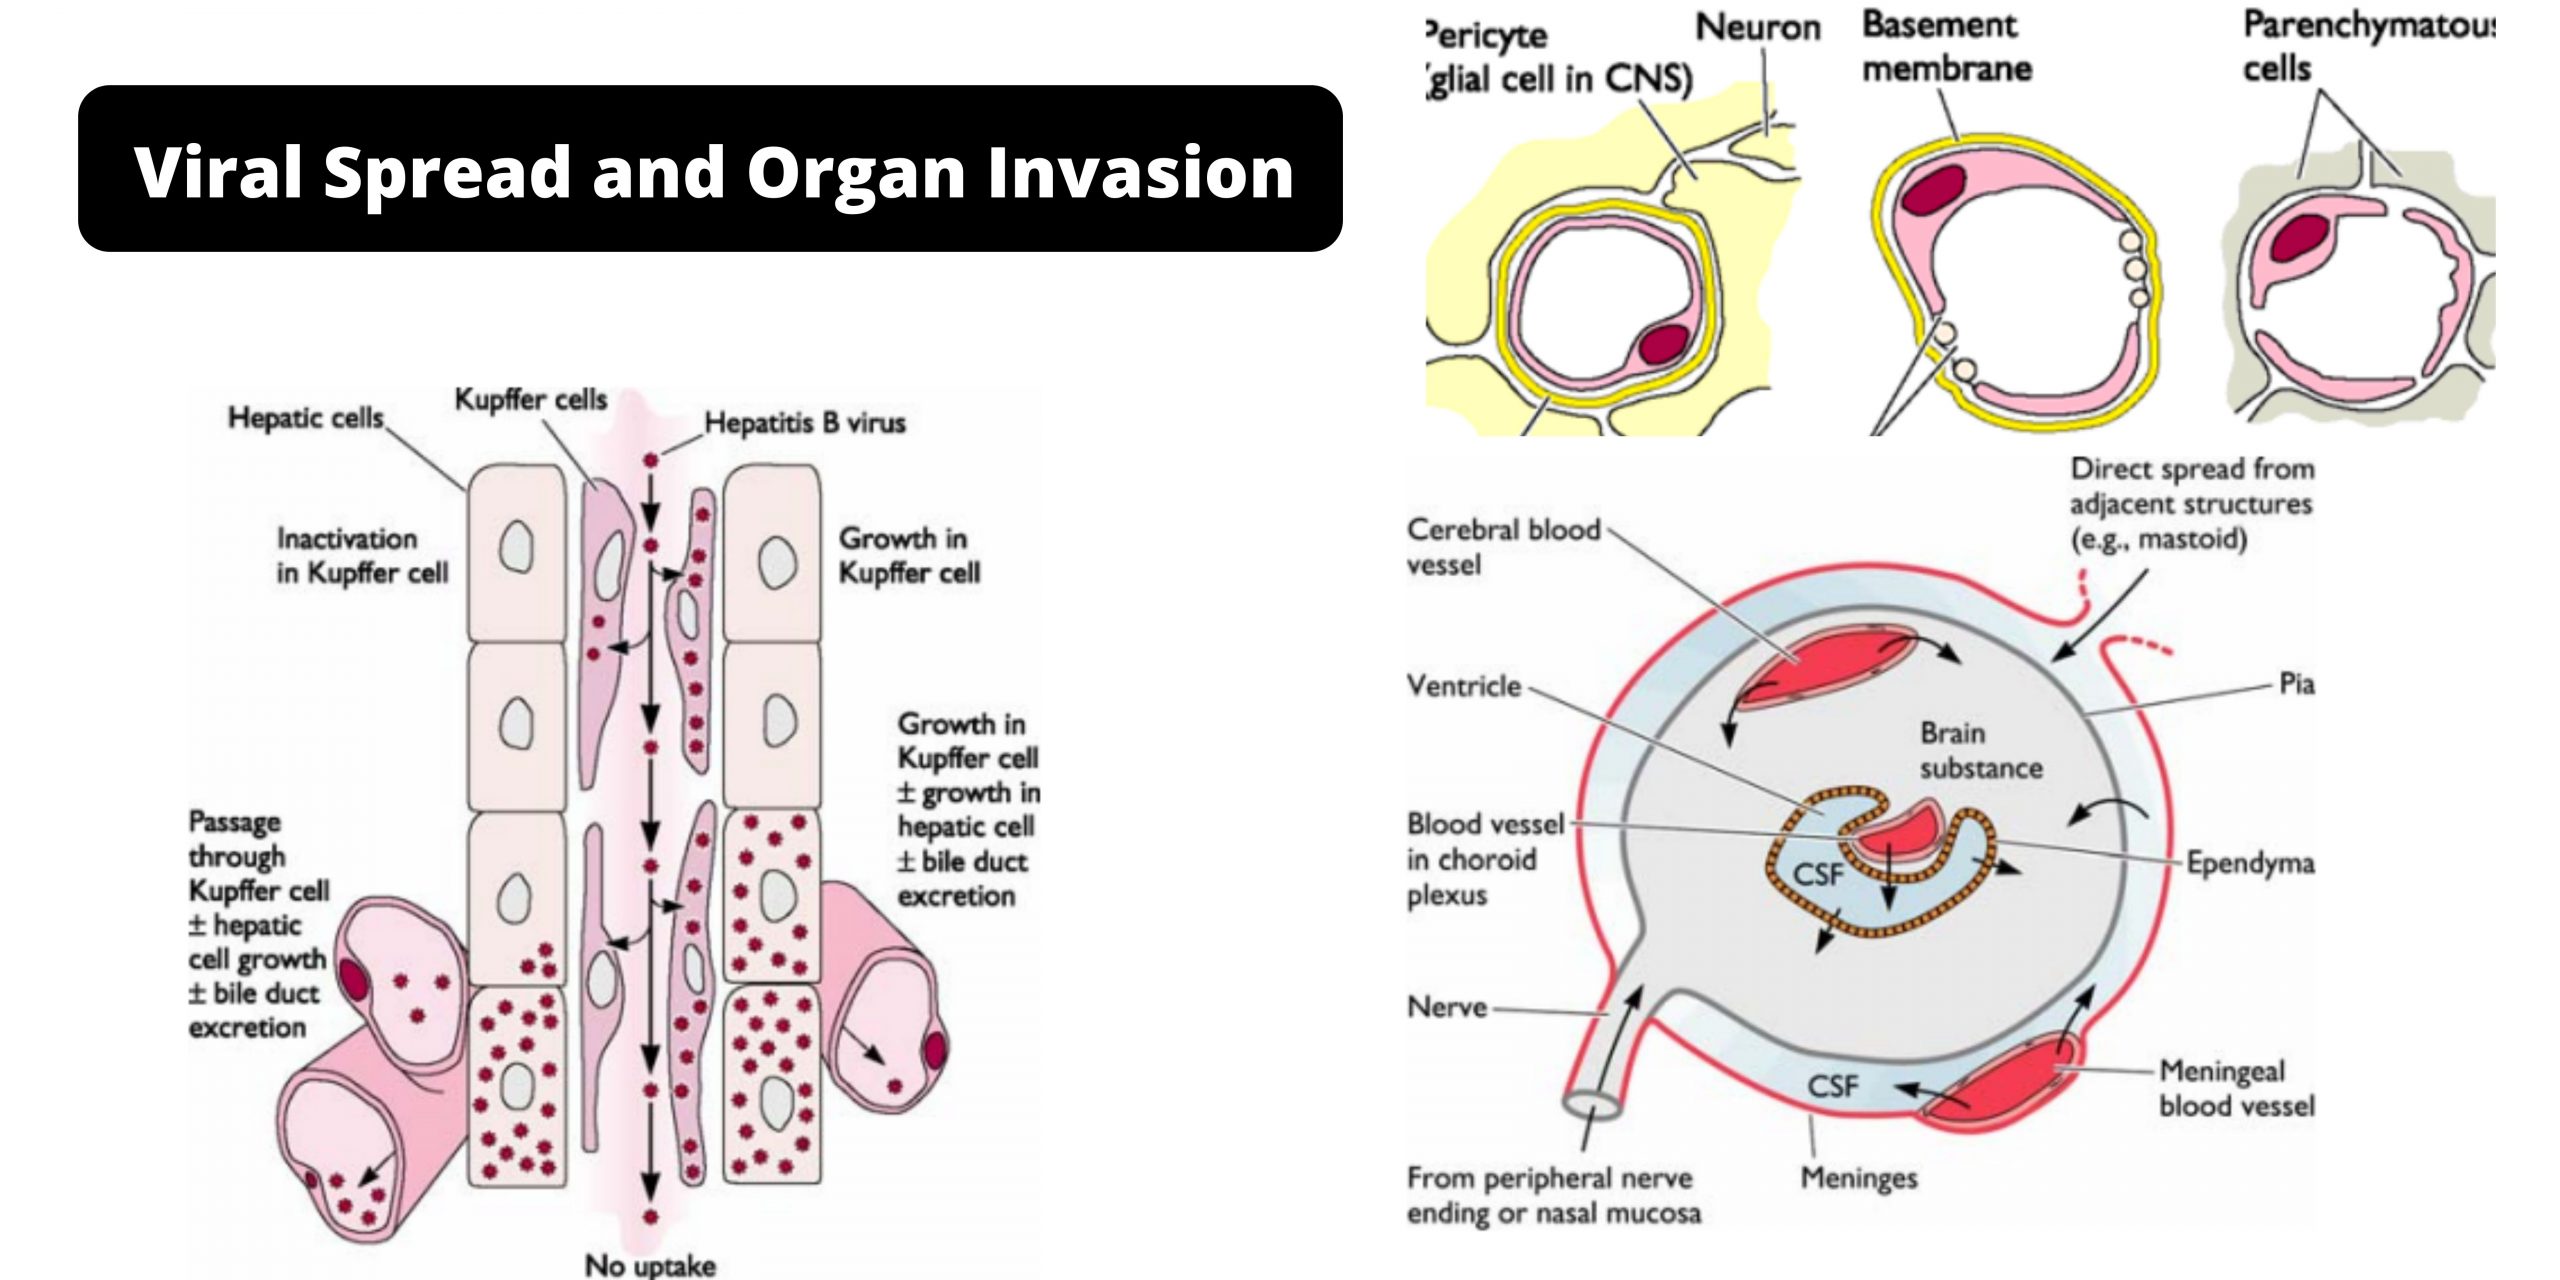 Viral Spread and Organ Invasion of Virus